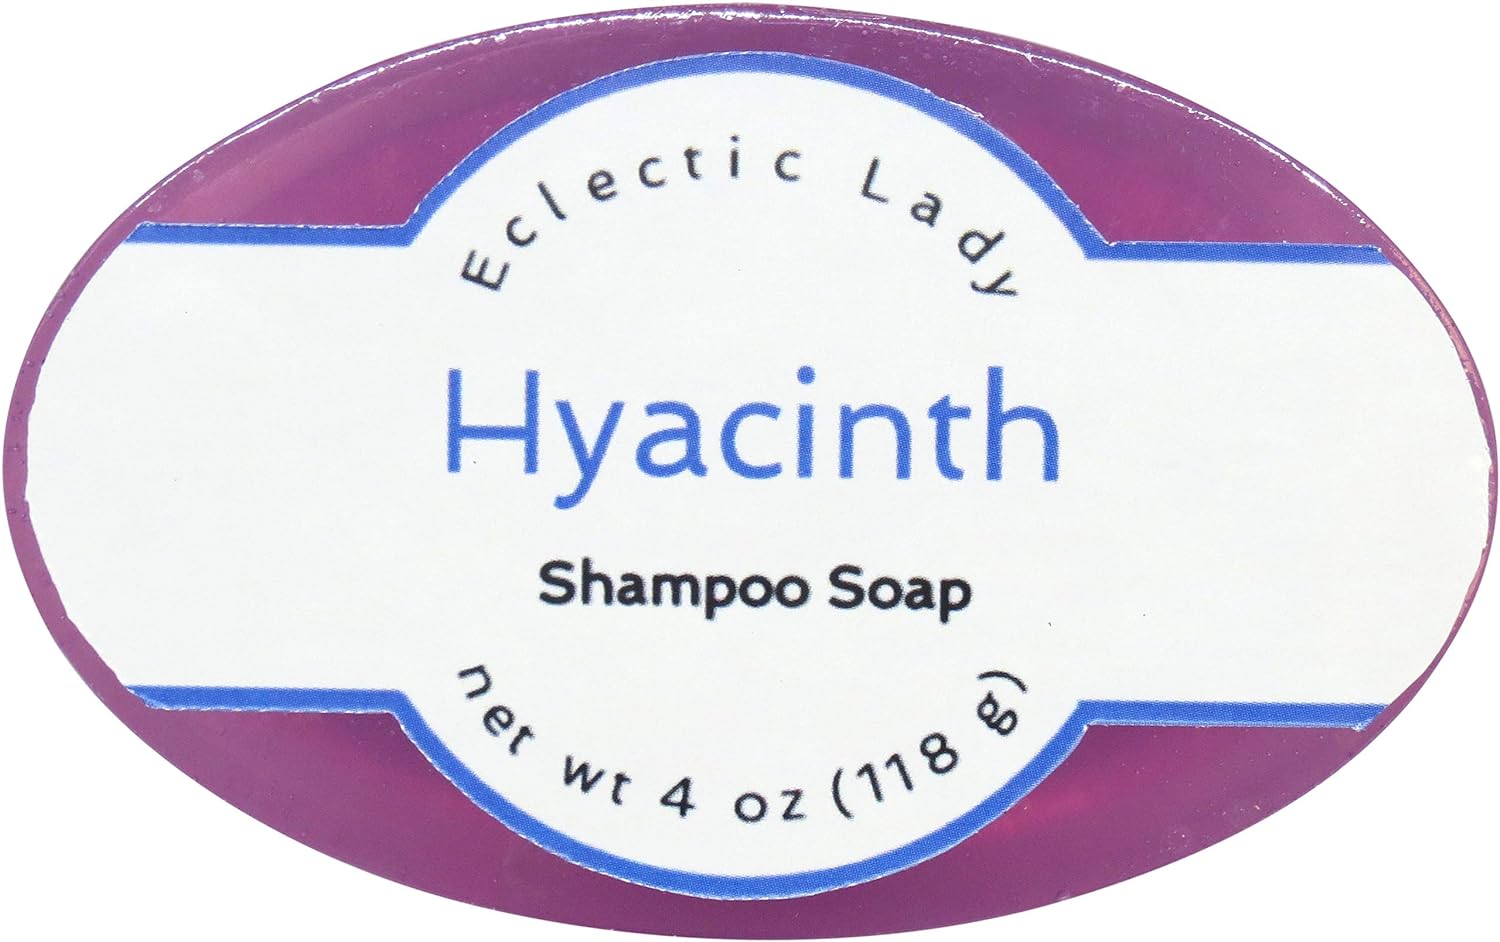 Eclectic Lady Hyacinth Shampoo Soap Bar with Pure Argan Oil, Silk Protein, Honey Protein and Extracts of Calendula ower, Aloe, Carrageenan, Sunower - 4  Bar